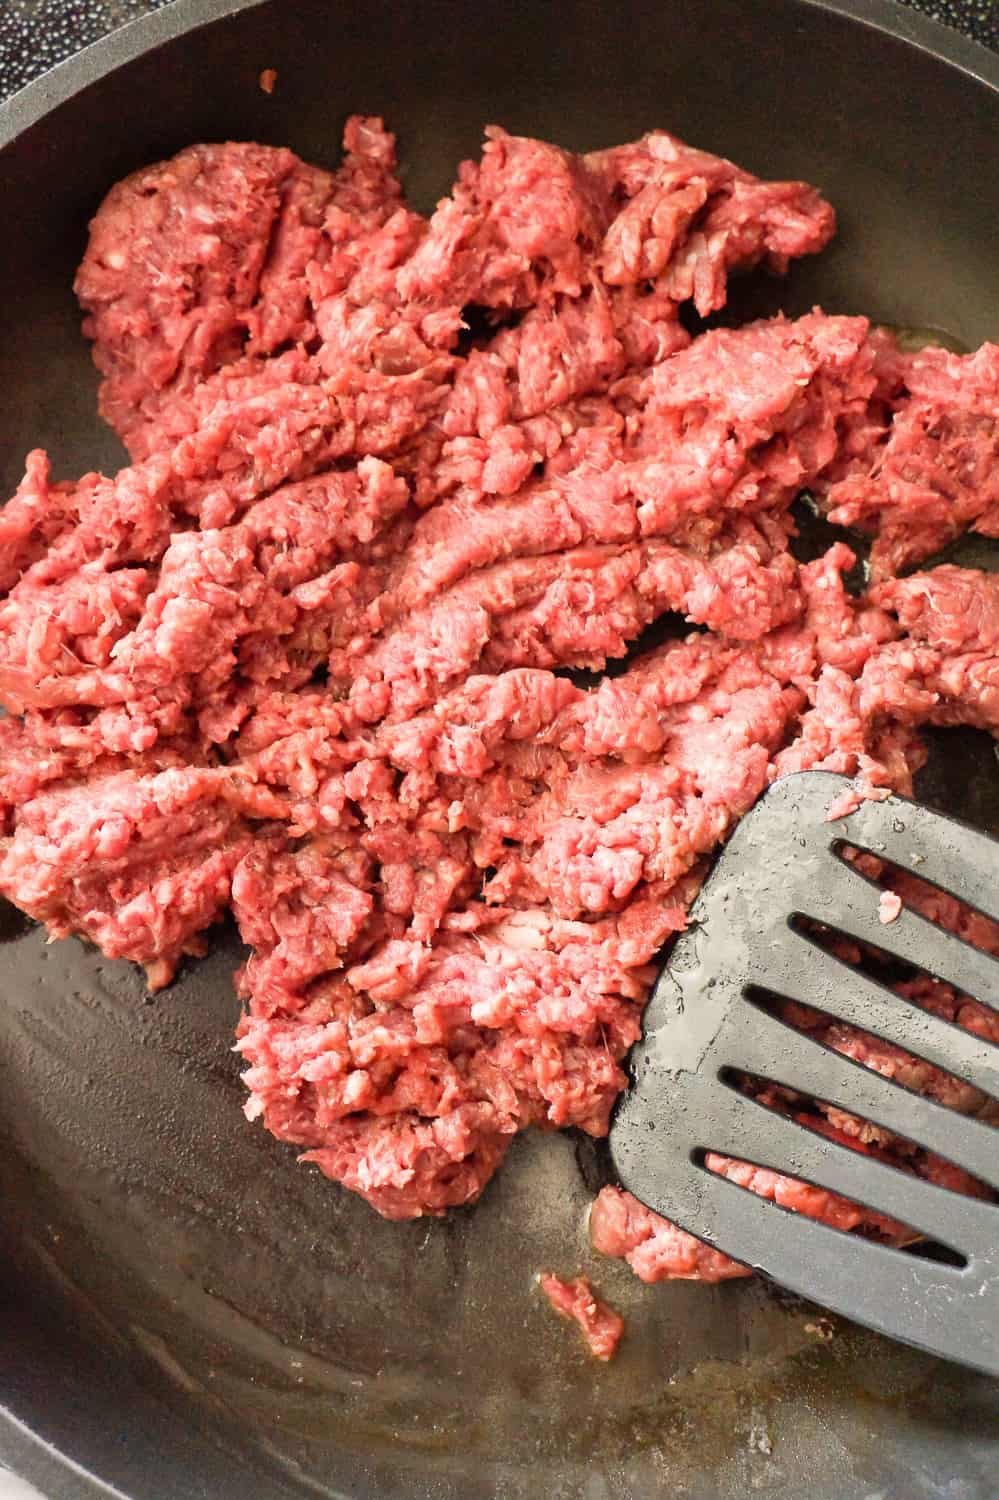 raw ground beef in a frying pan